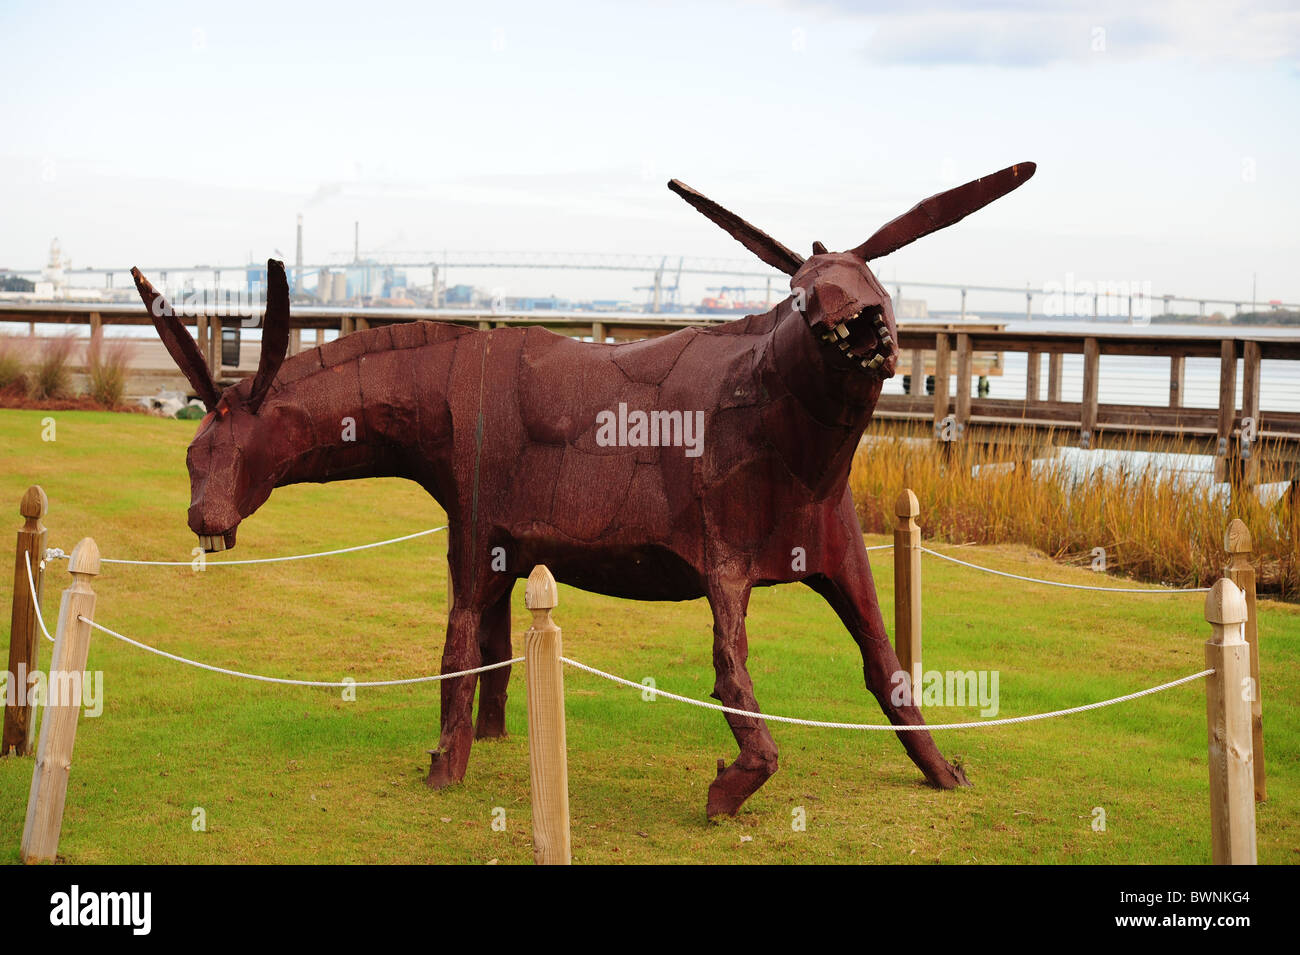 Situational art object, two-headed donkey, one head at each end of donkey Stock Photo